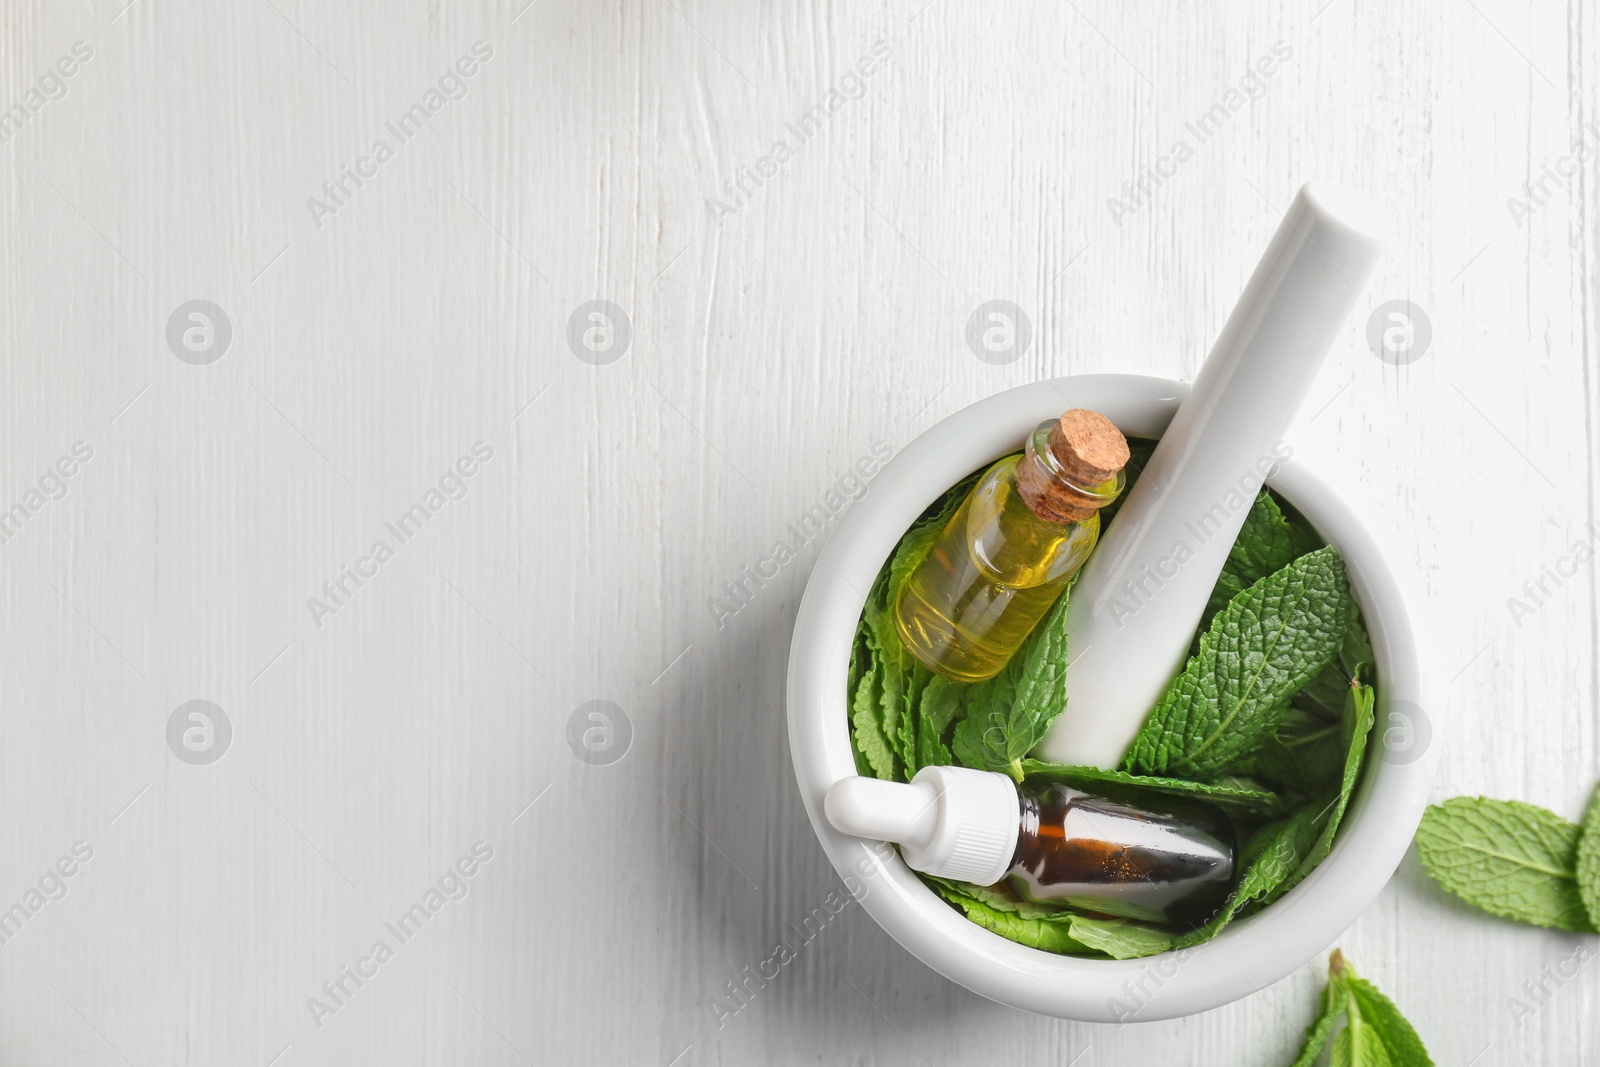 Photo of Mortar with bottles of essential oil and mint leaves on white wooden background